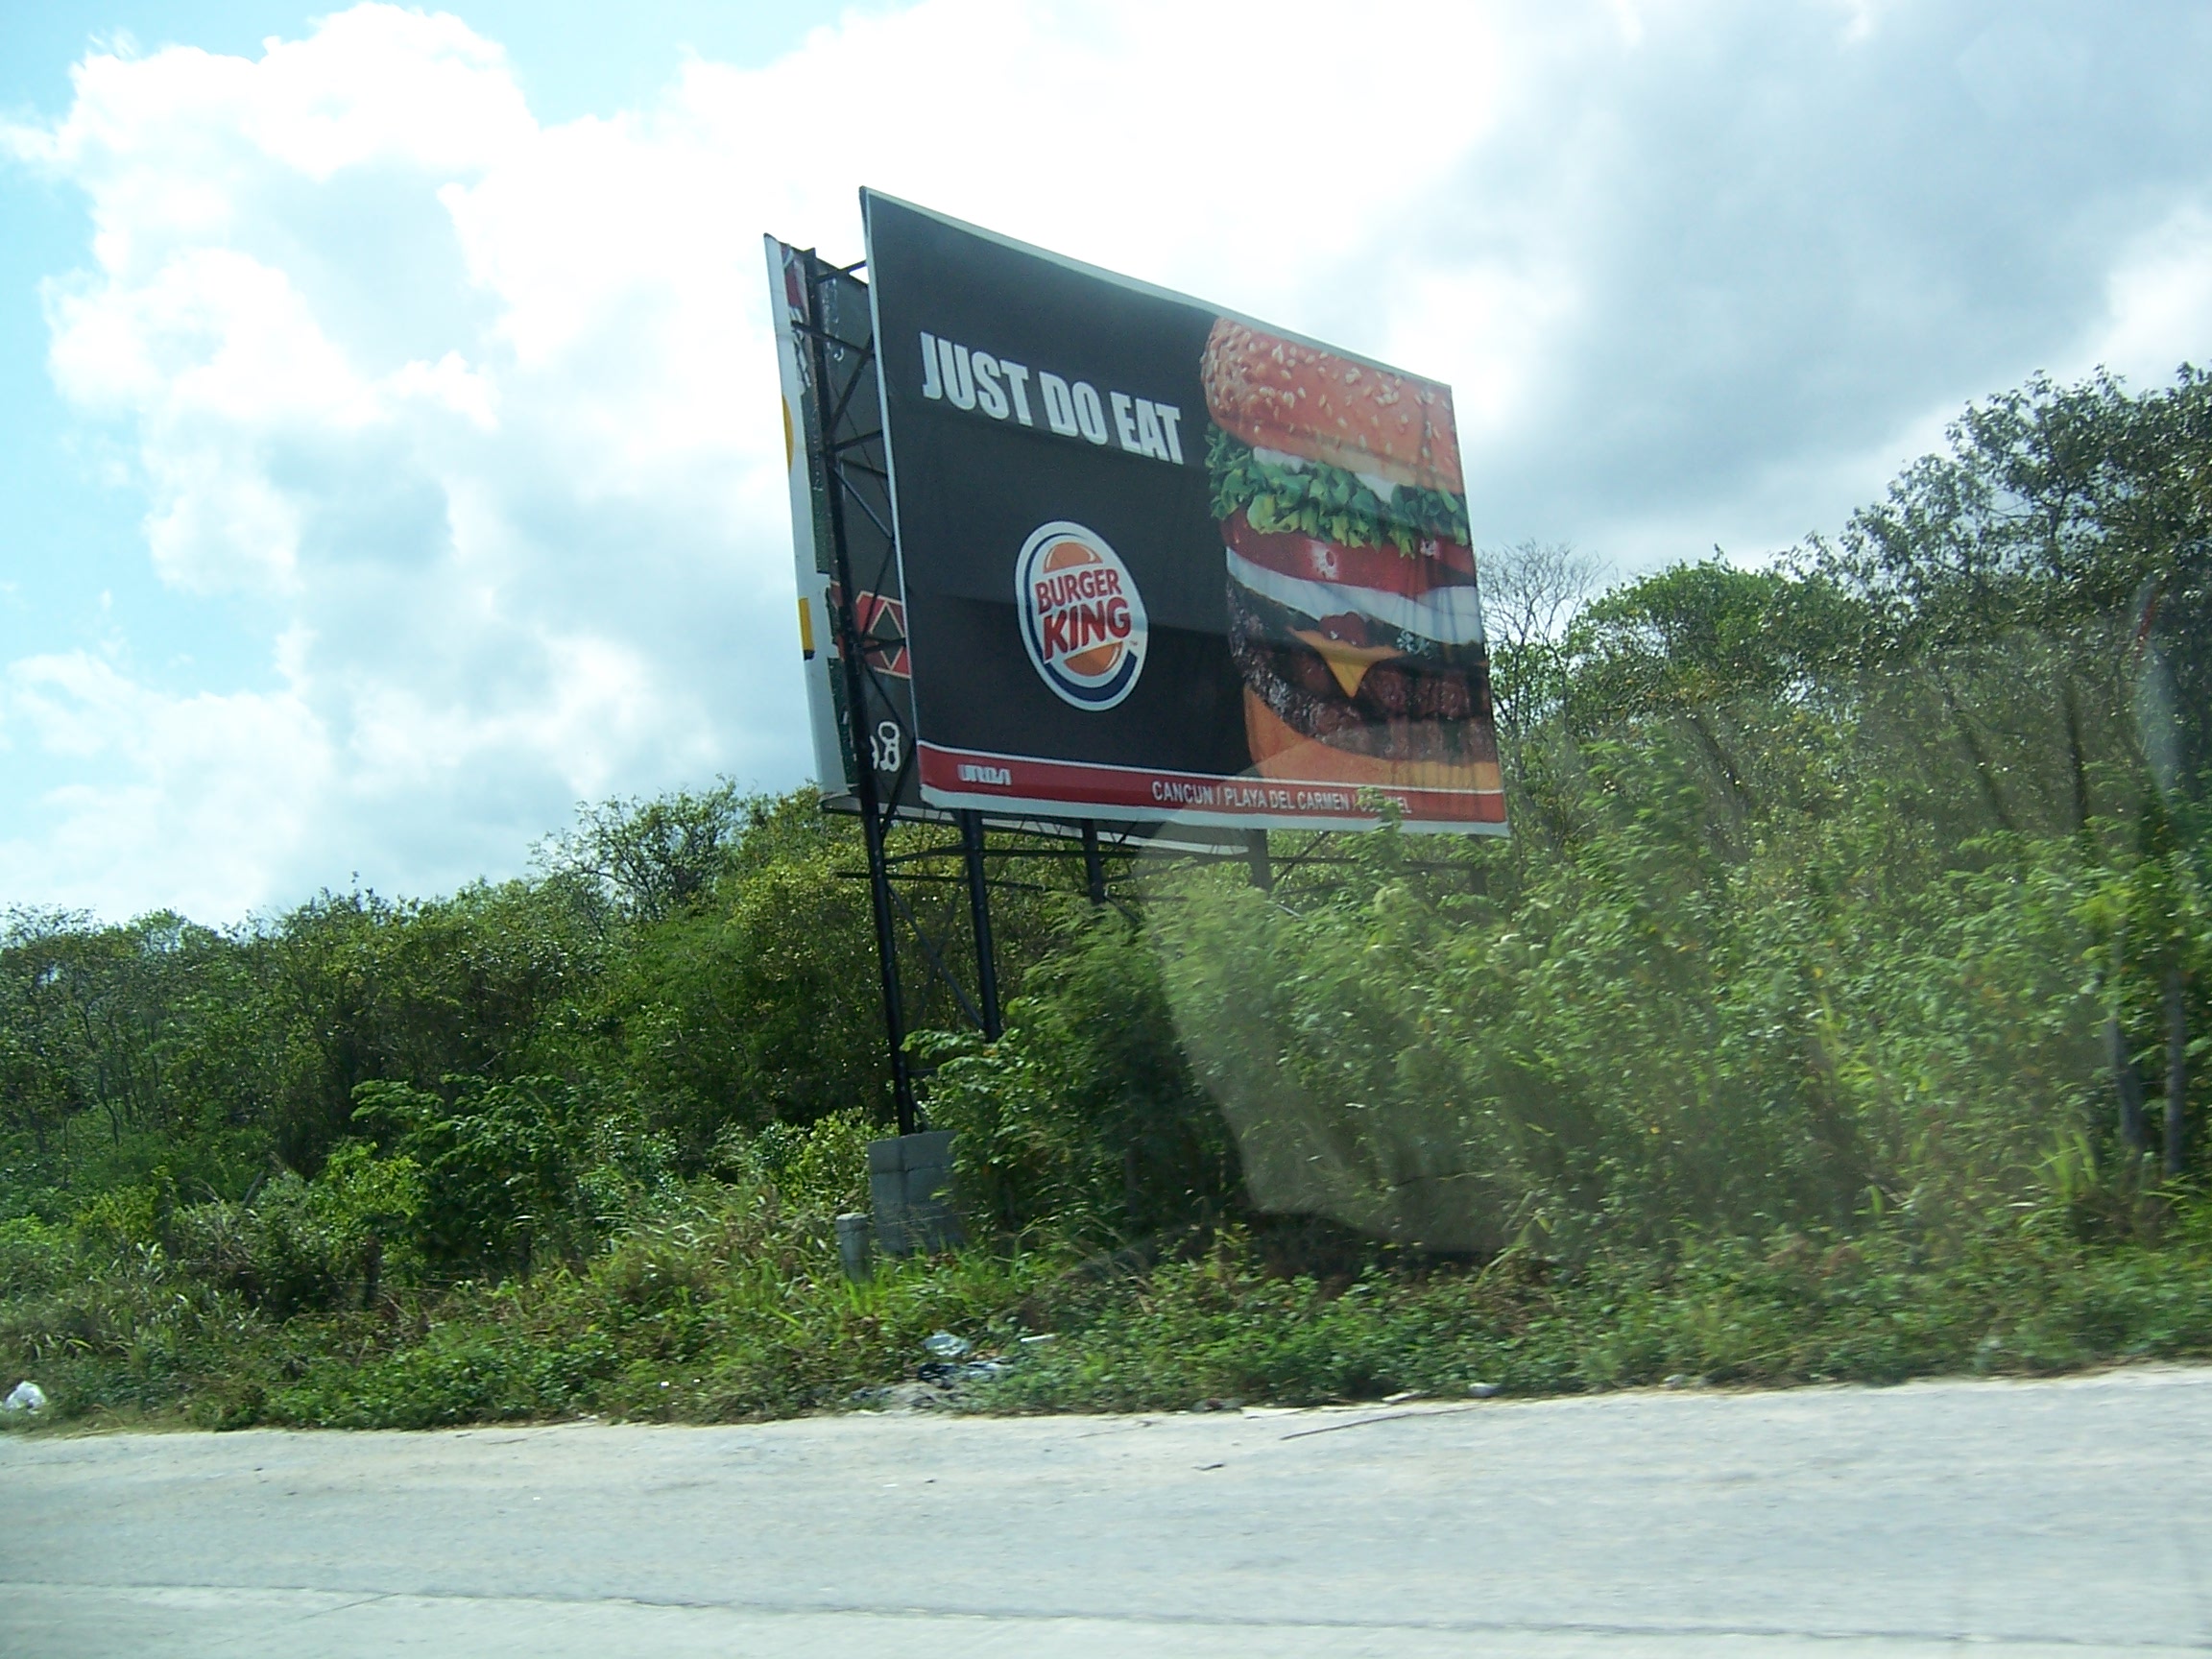 Billboard just outside of Cancun. Its hard to feel like youre in Mexico when the billboards are all in English.